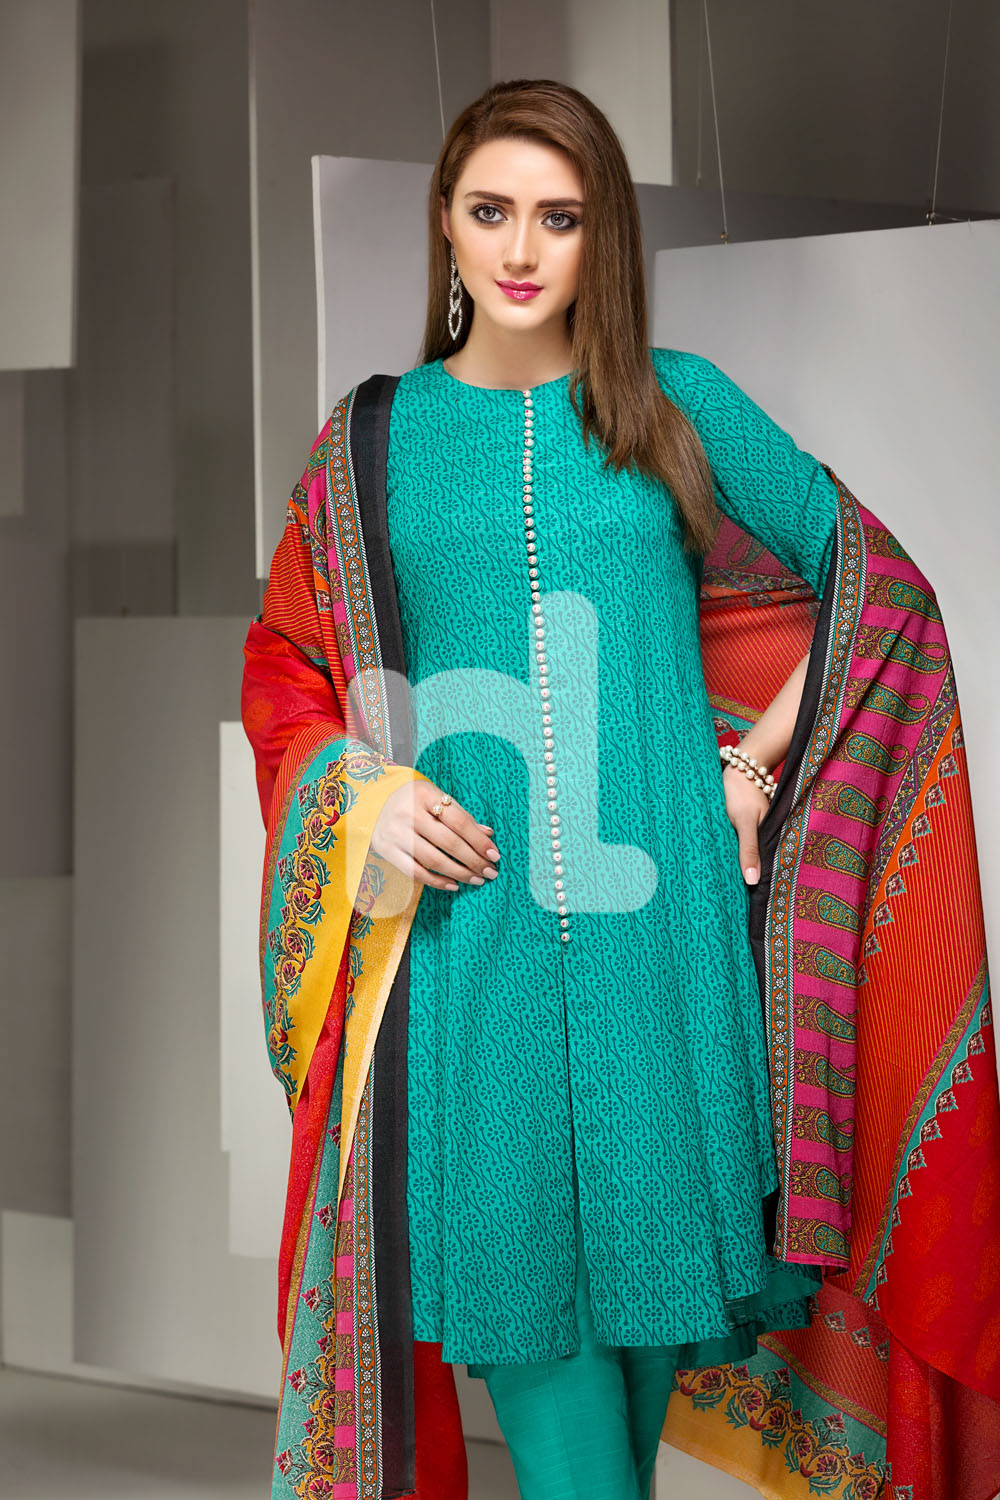 Unstitched 3 Piece Aqua Color Khaddar Pakistani Dress On Sale To Buy Online By Nishat Linen Winter Collection 2019 At A Discount Price.